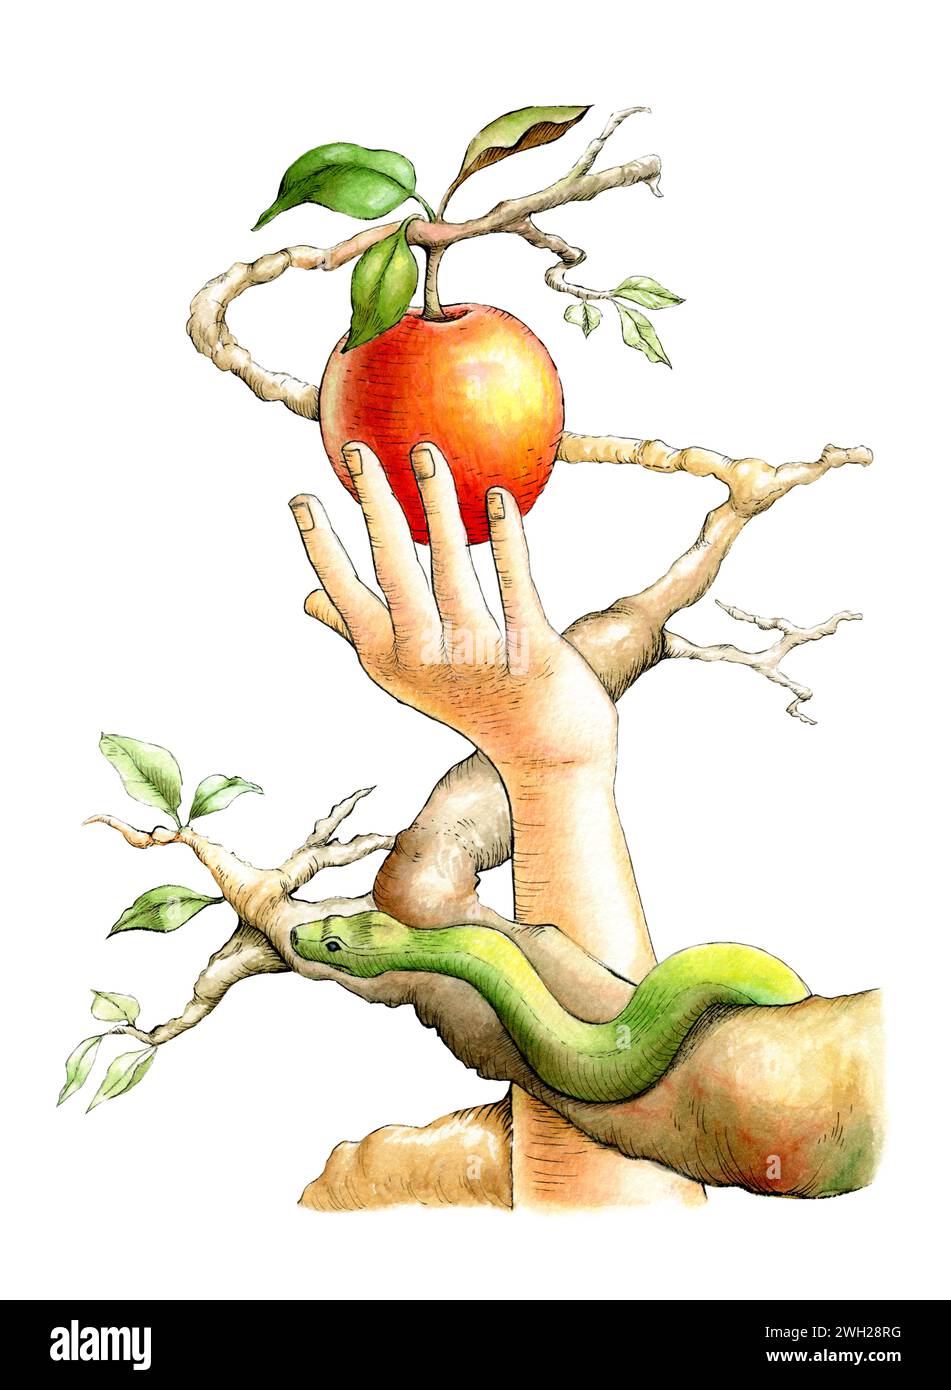 Eva picking up the forbidden fruit, while the snake watches her from a branch. Traditional illustration on paper. Stock Photo